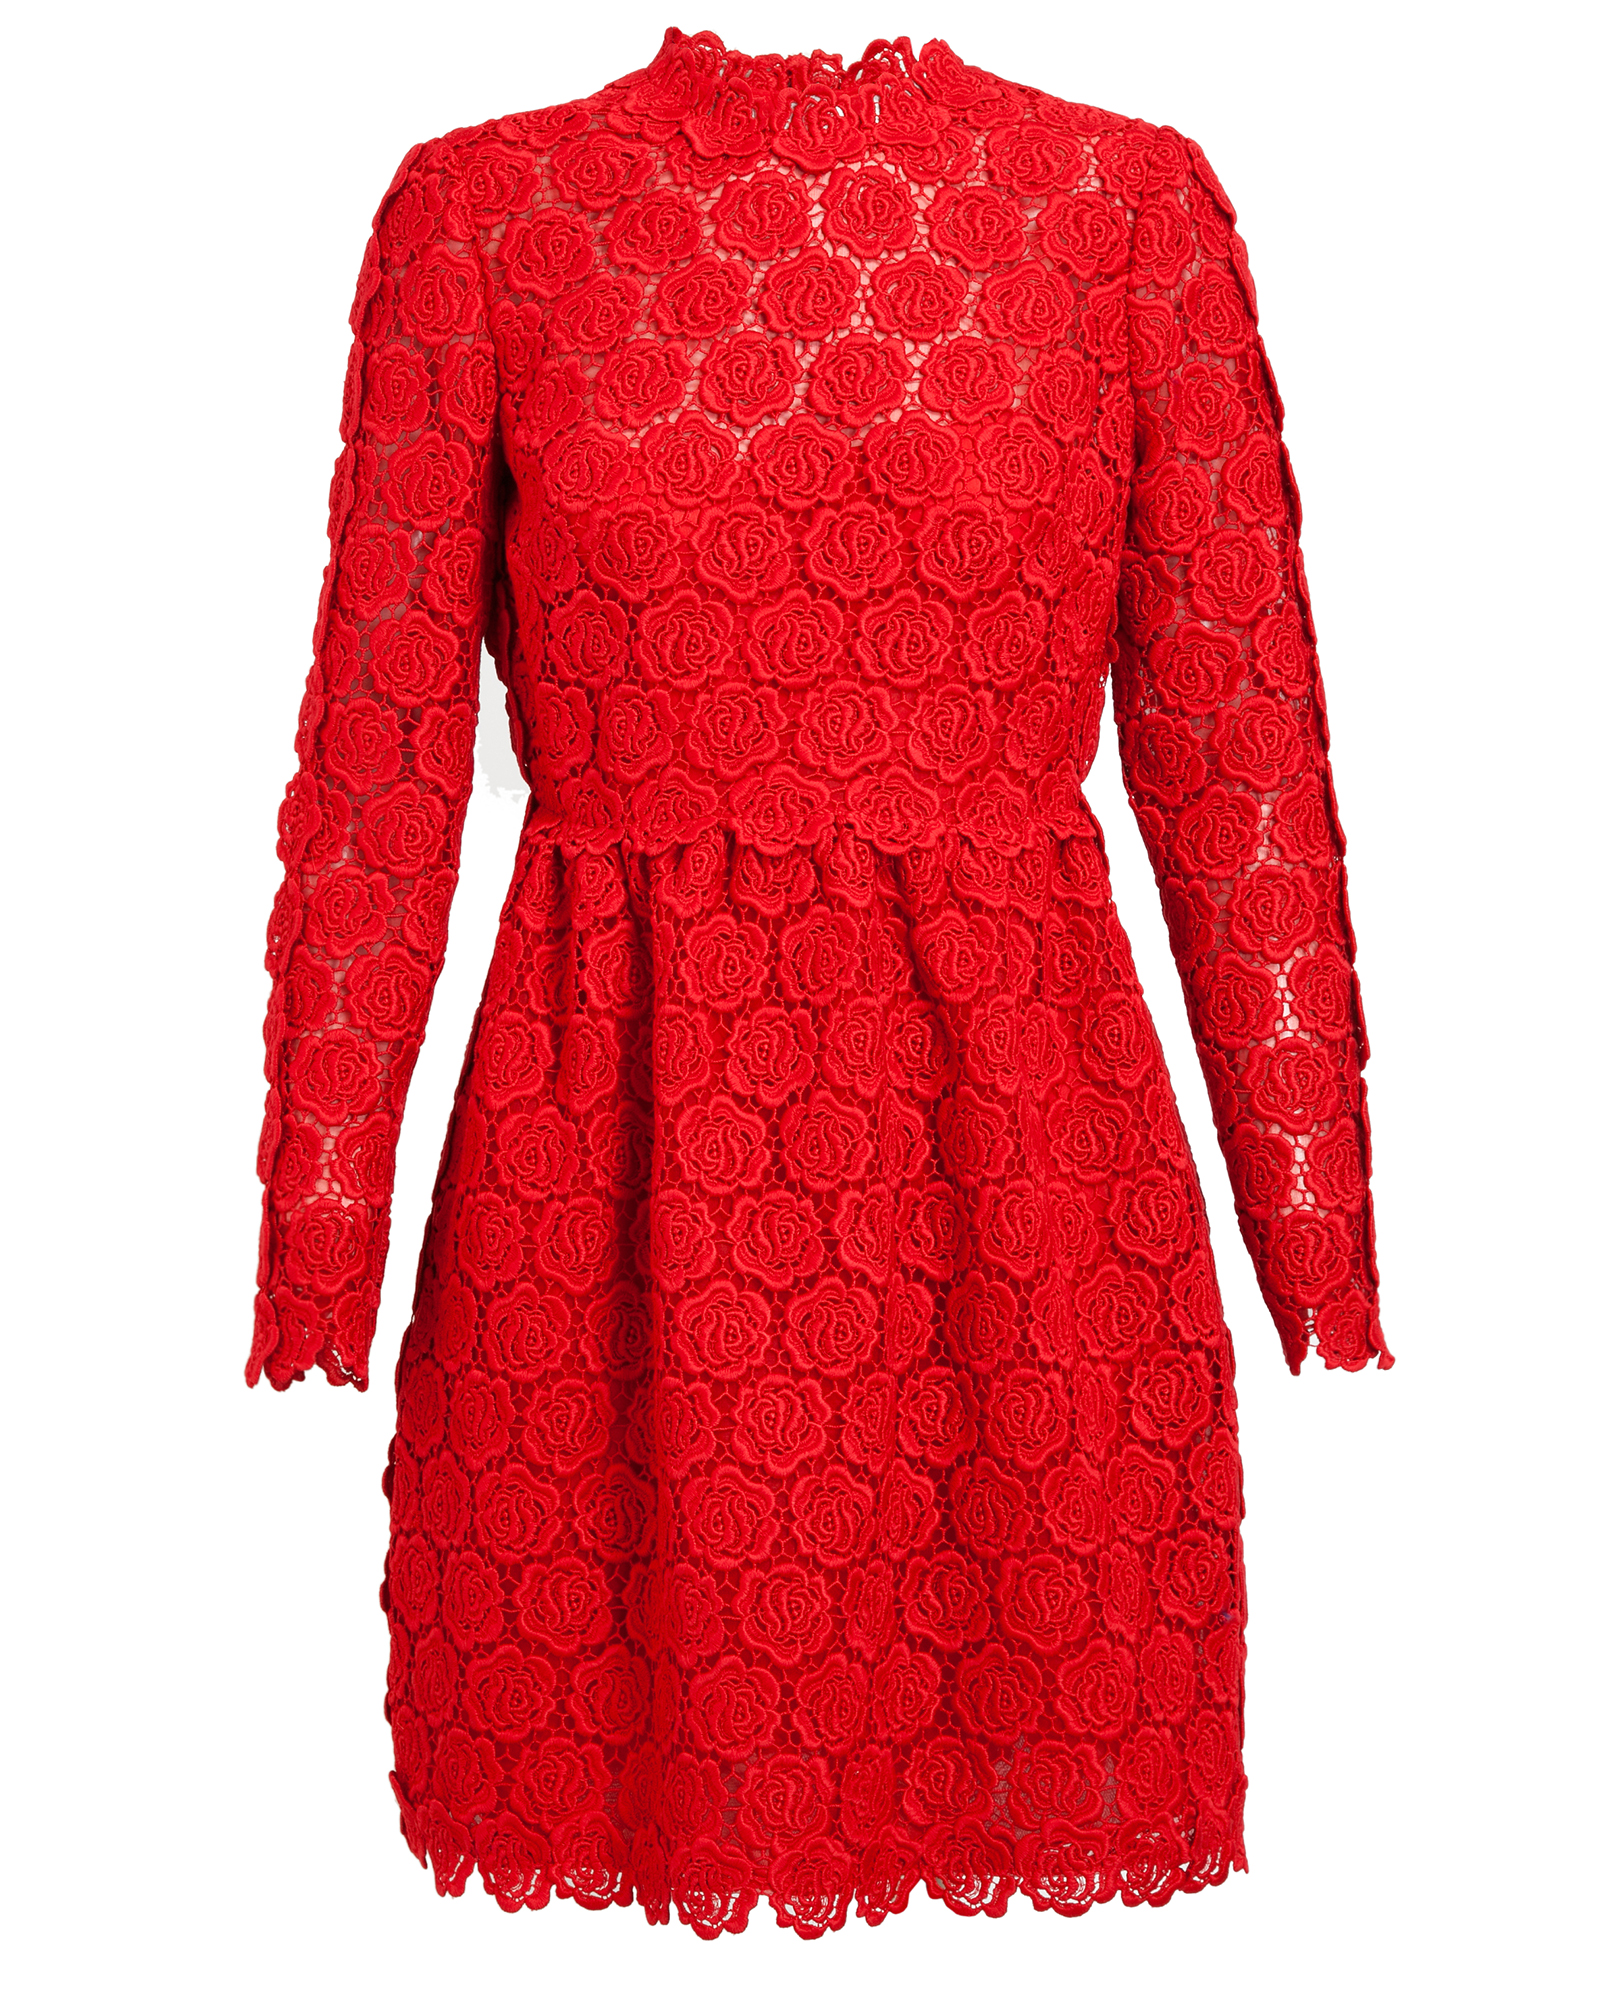 Valentino Macramé Lace Dress in Red | Lyst